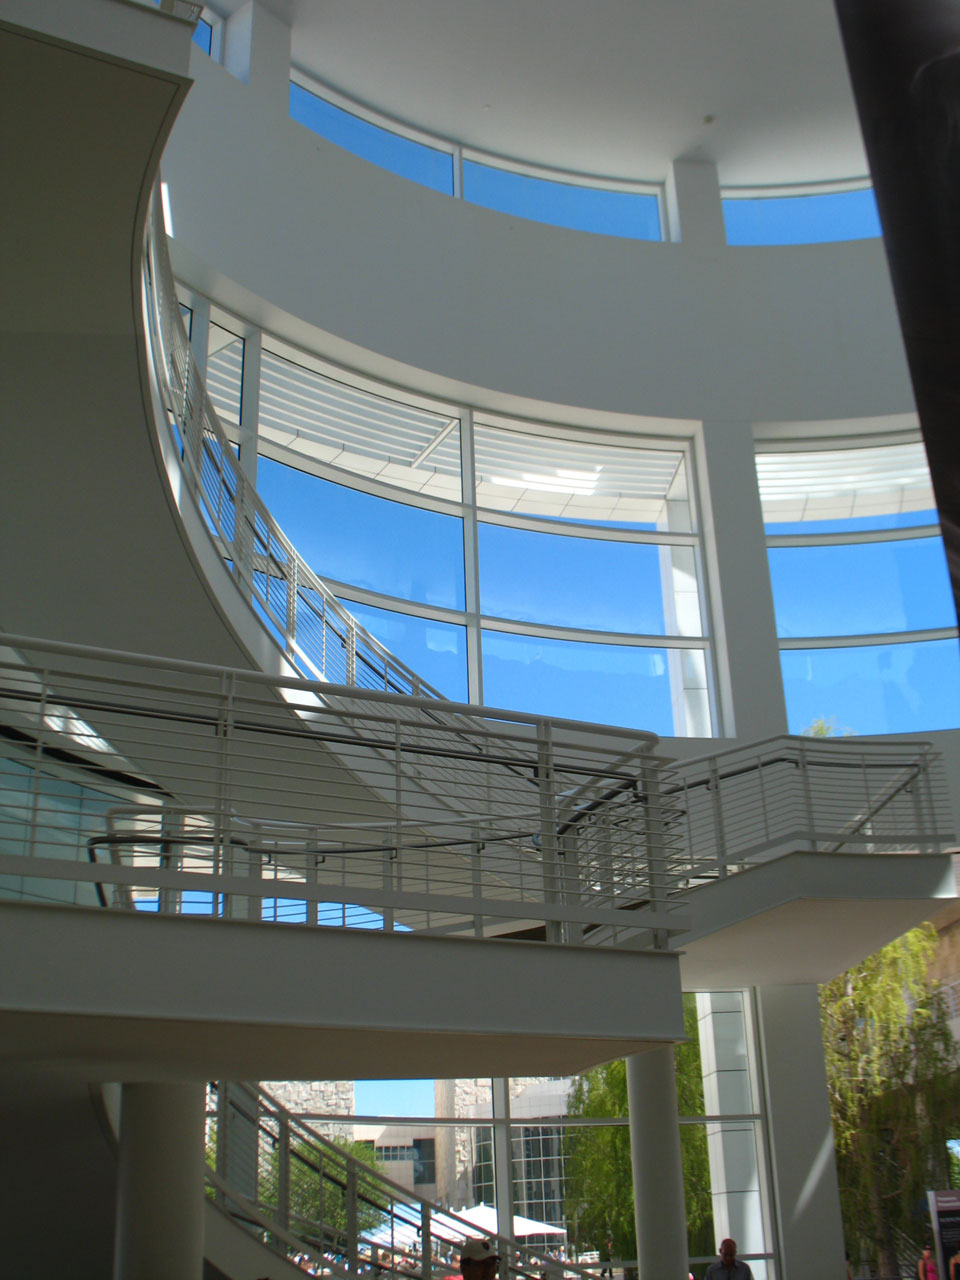 getty center museum free photo